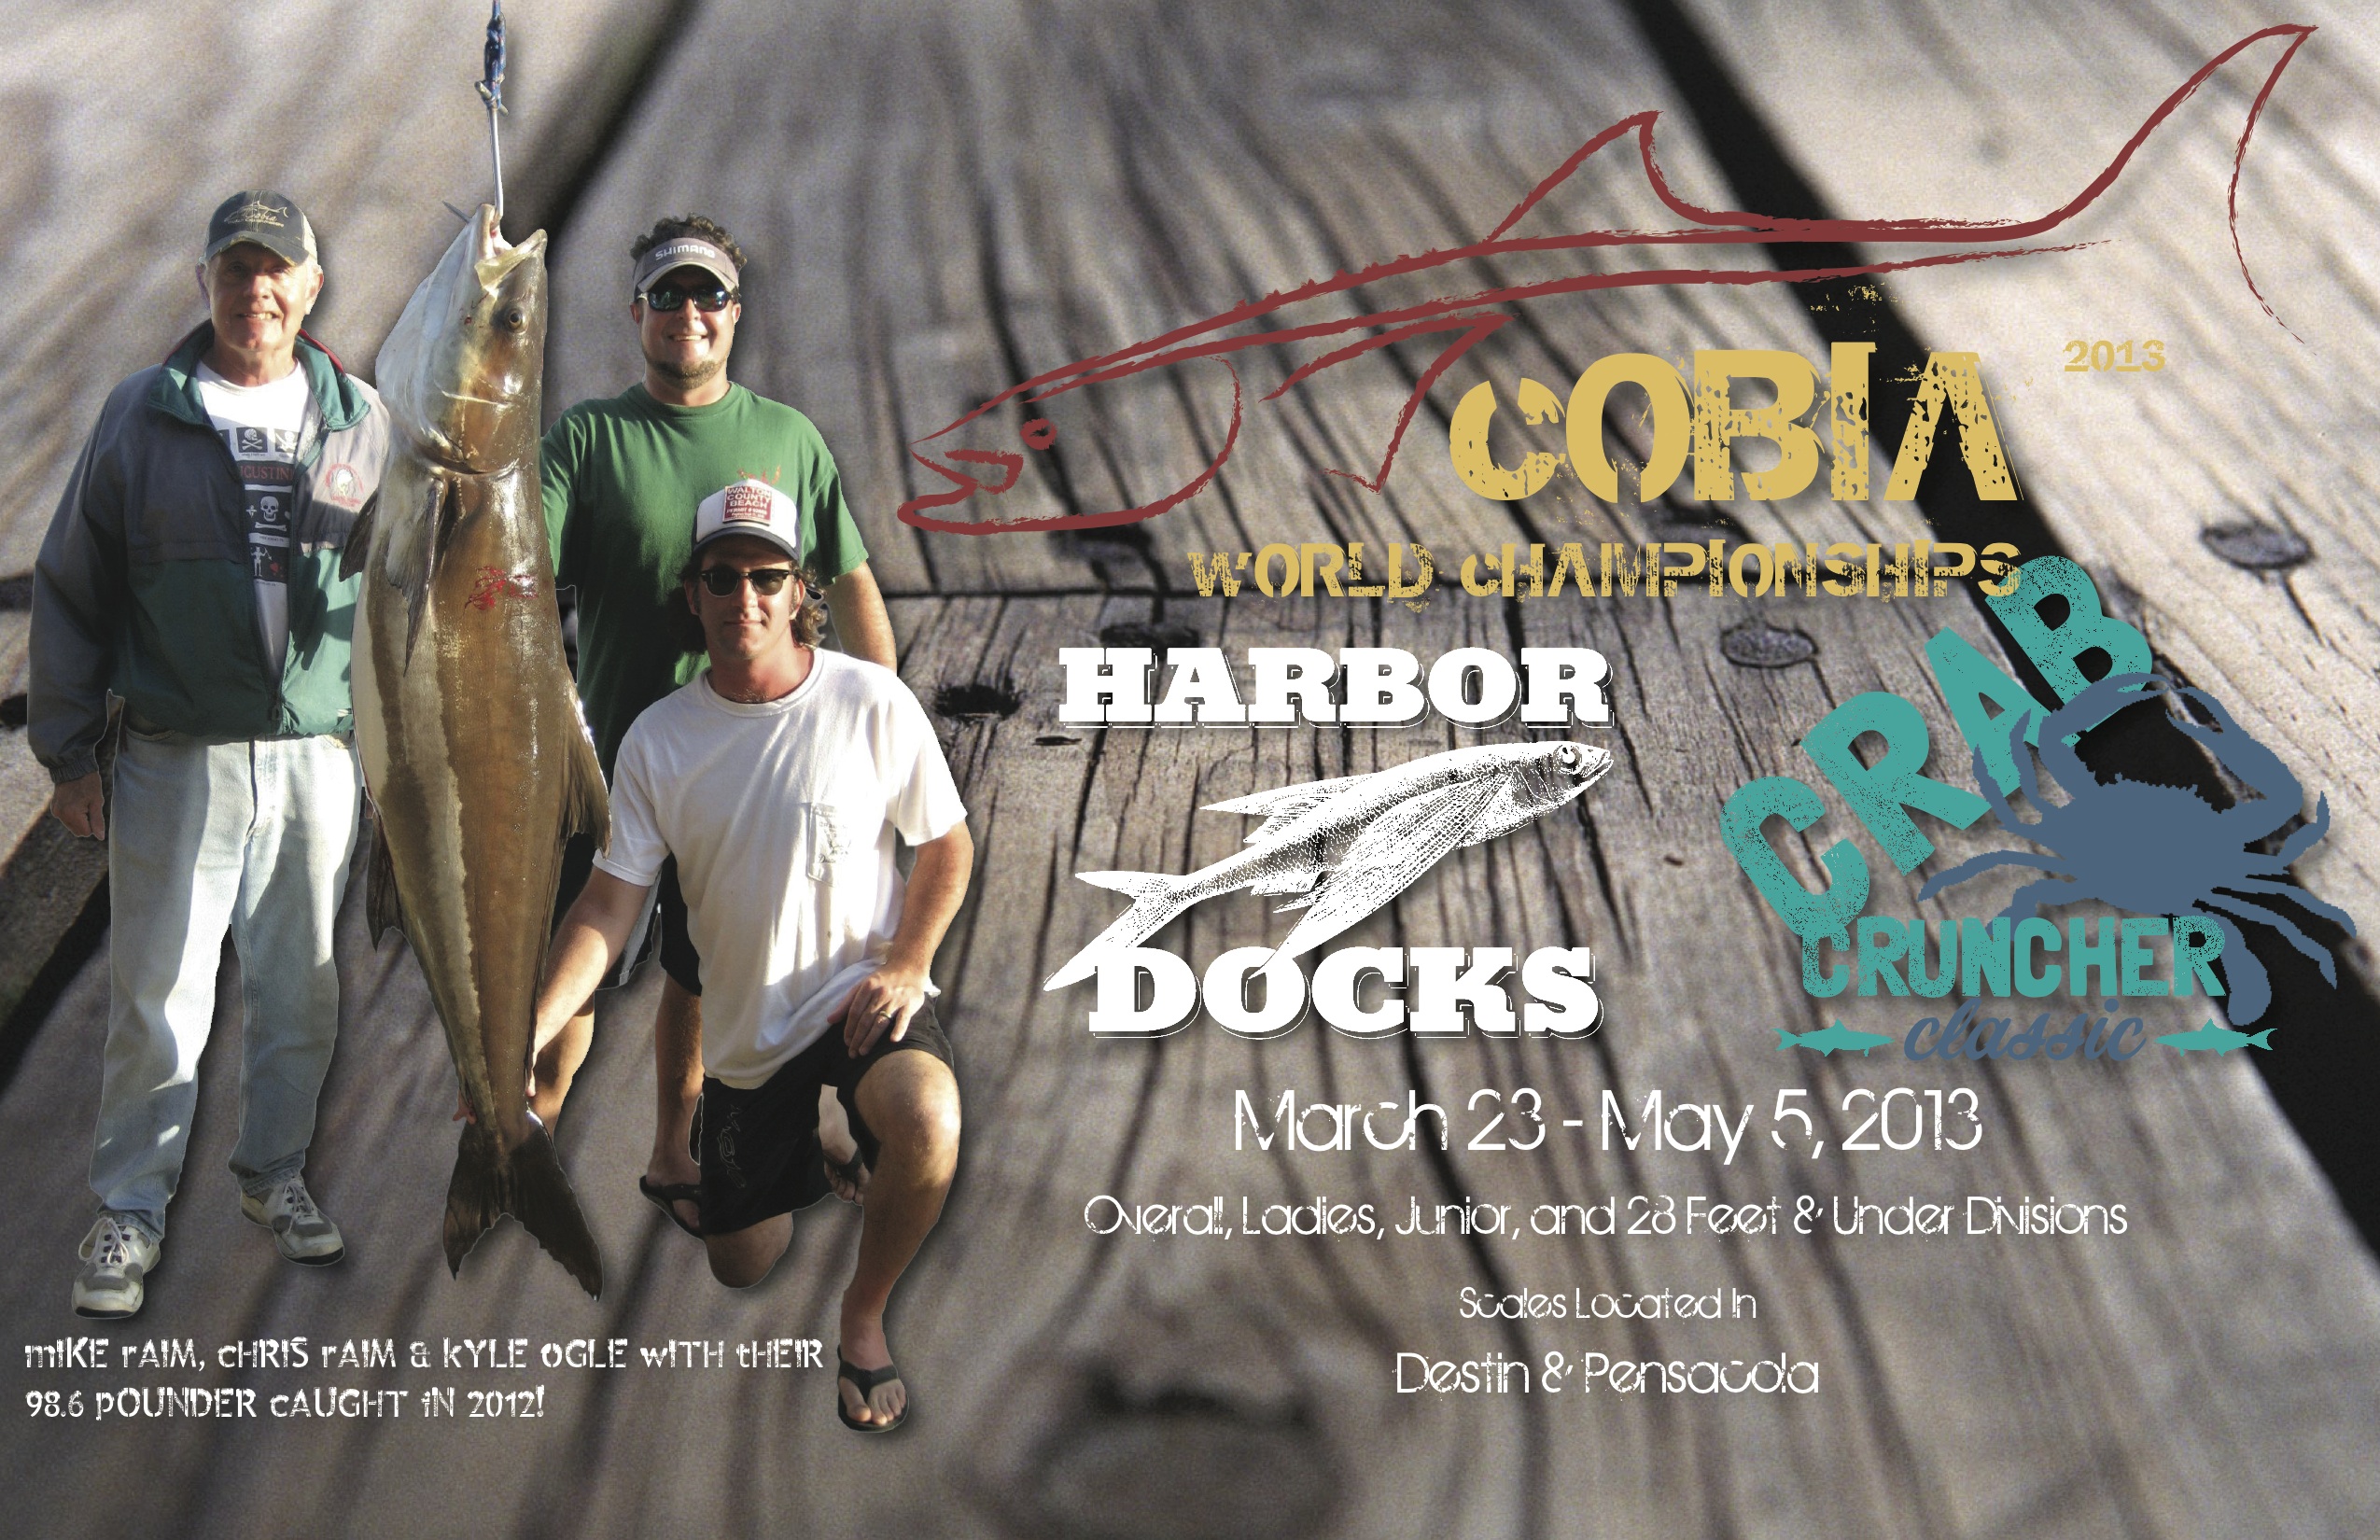 Paddle Board Division Added to Cobia World Championships Florida